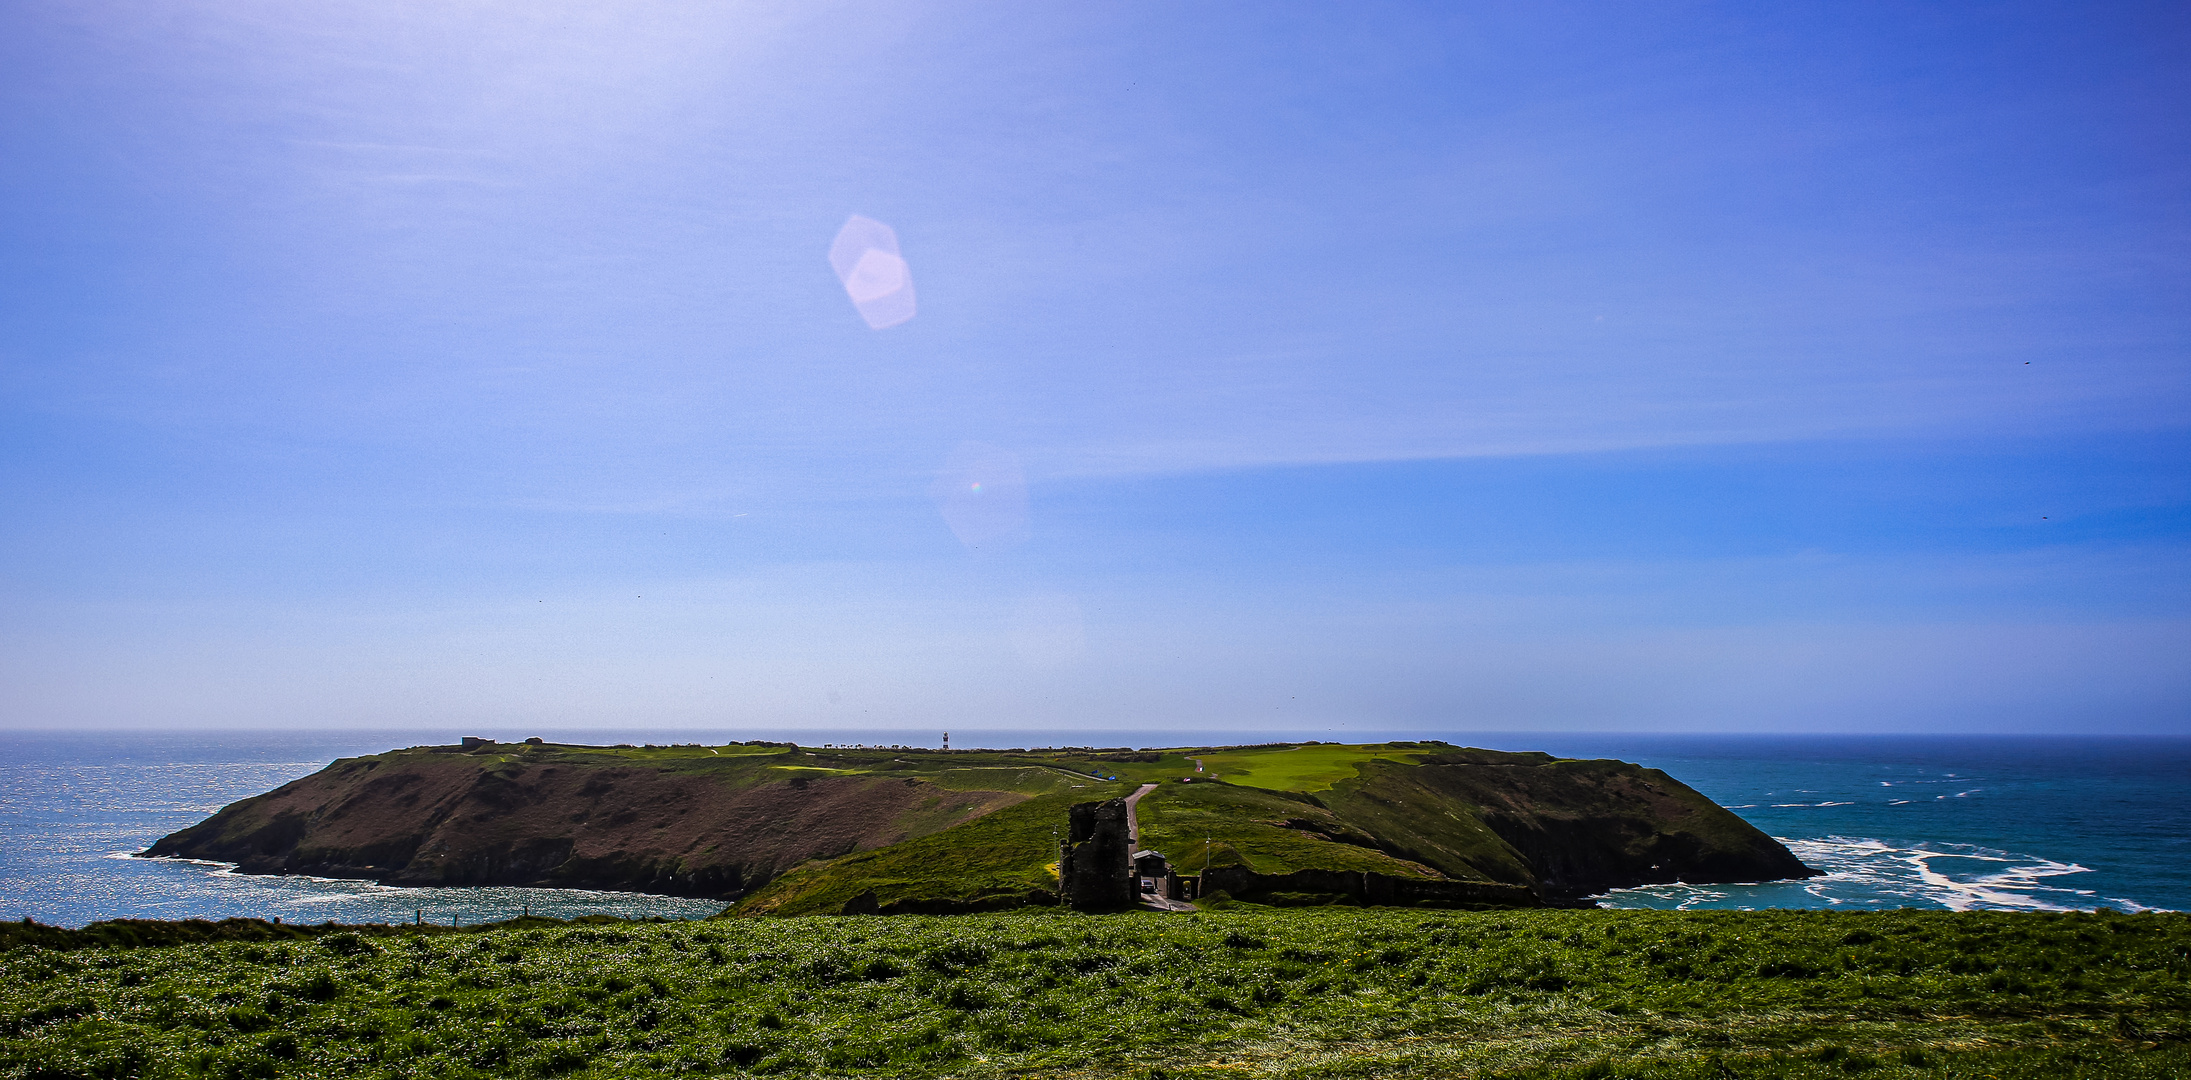 The old Head of Kinsale....